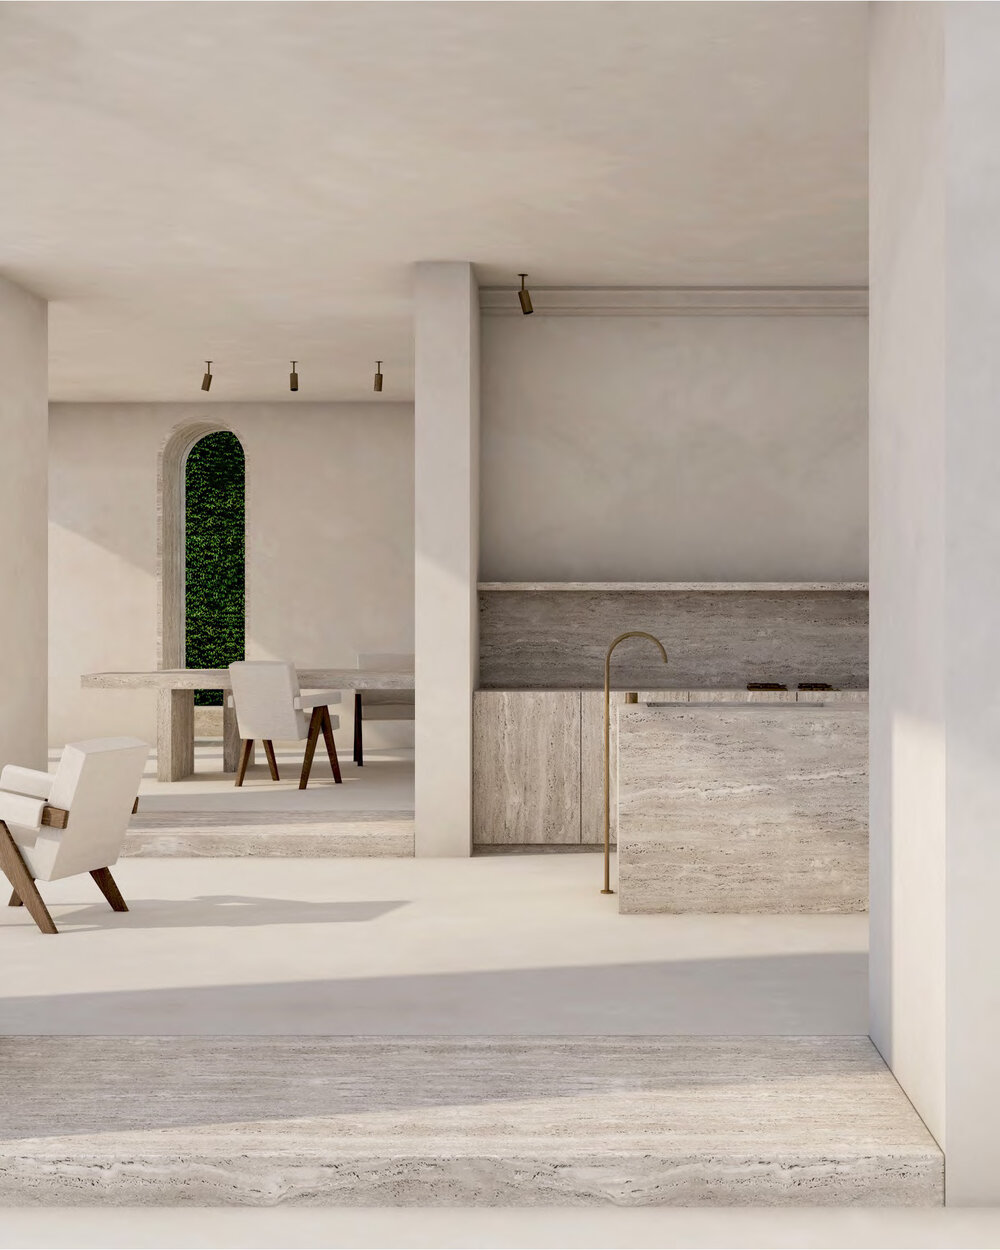 A dream home with gentle curves of lime plaster and travertine